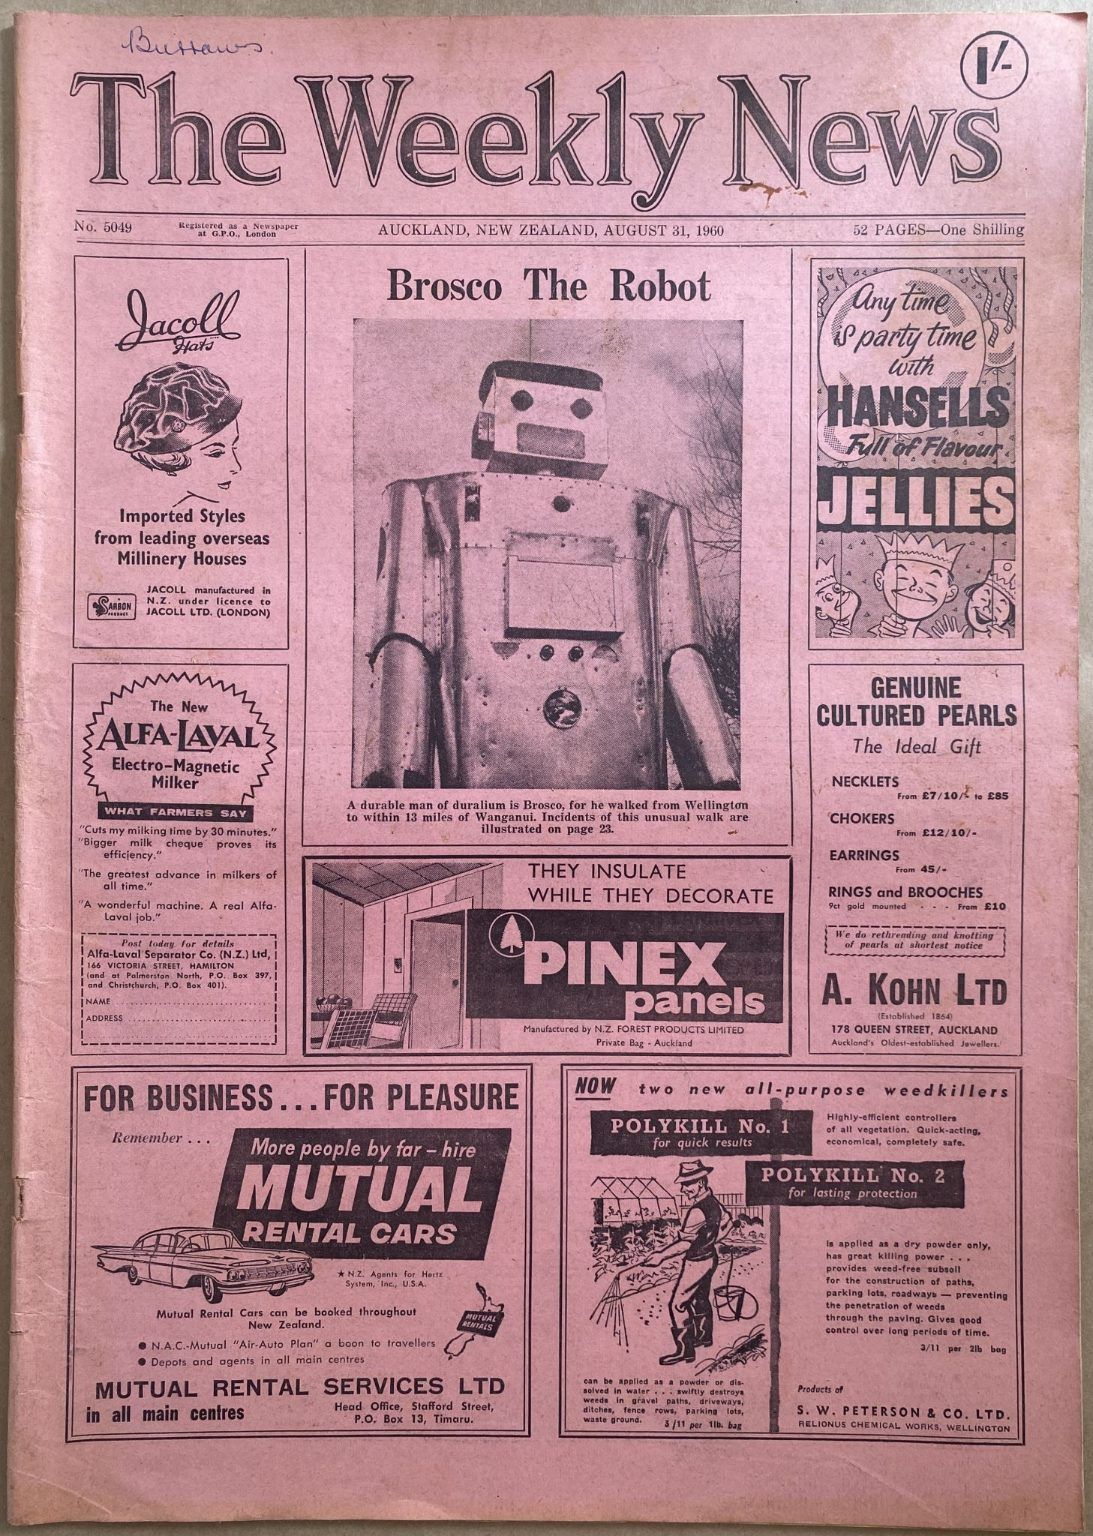 OLD NEWSPAPER: The Weekly News, No. 5049, 31 August 1960